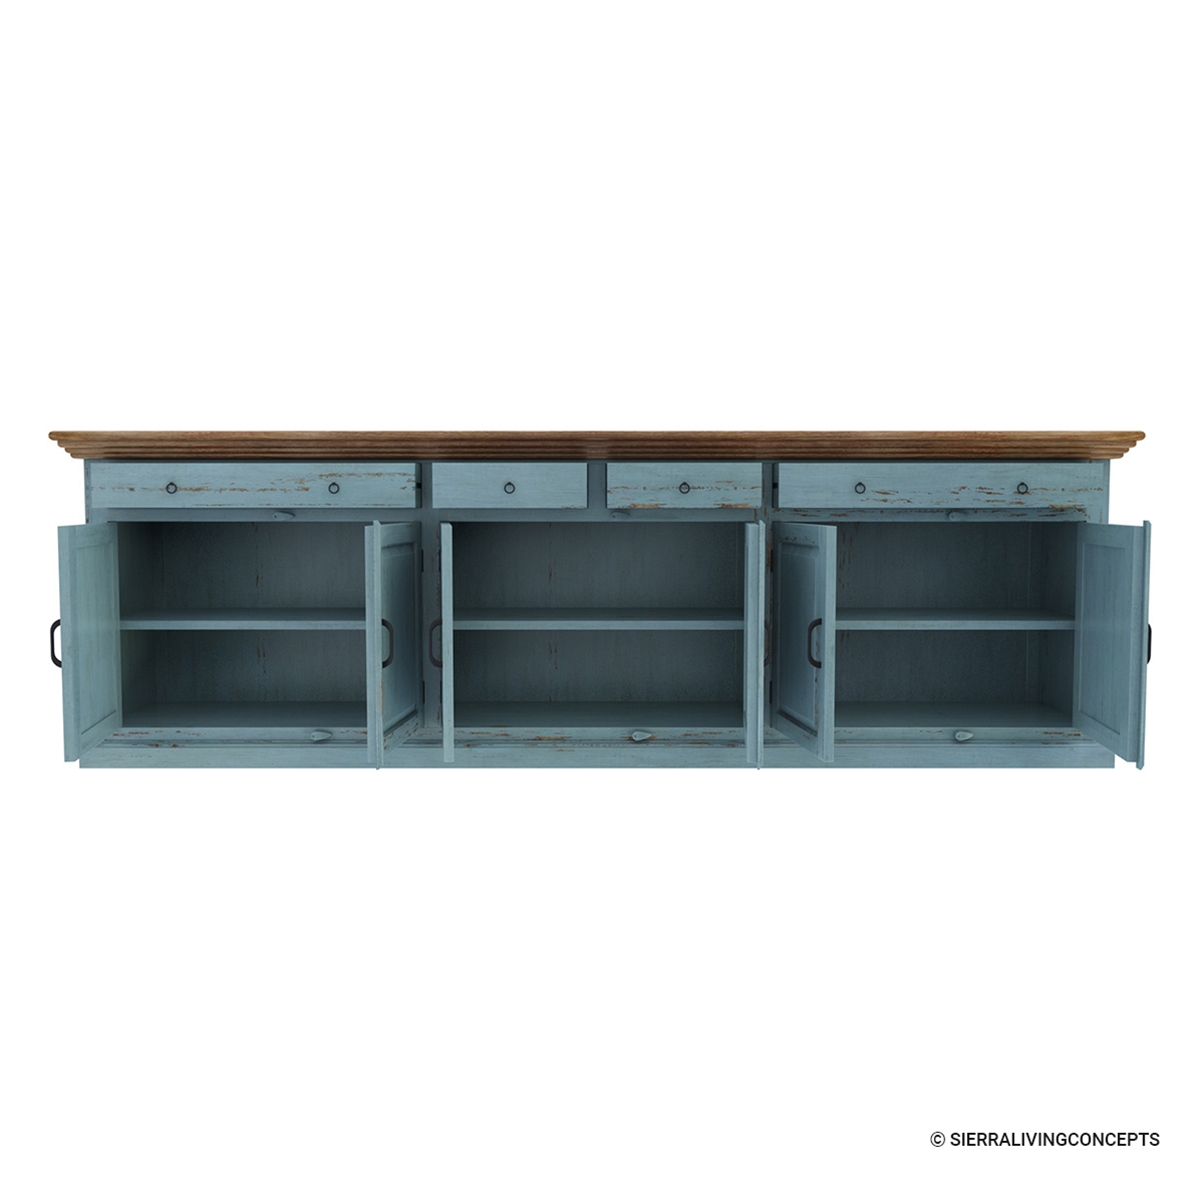 Conway Blue Two Tone Solid Wood 4 Drawer Extra Long Sideboard Buffet